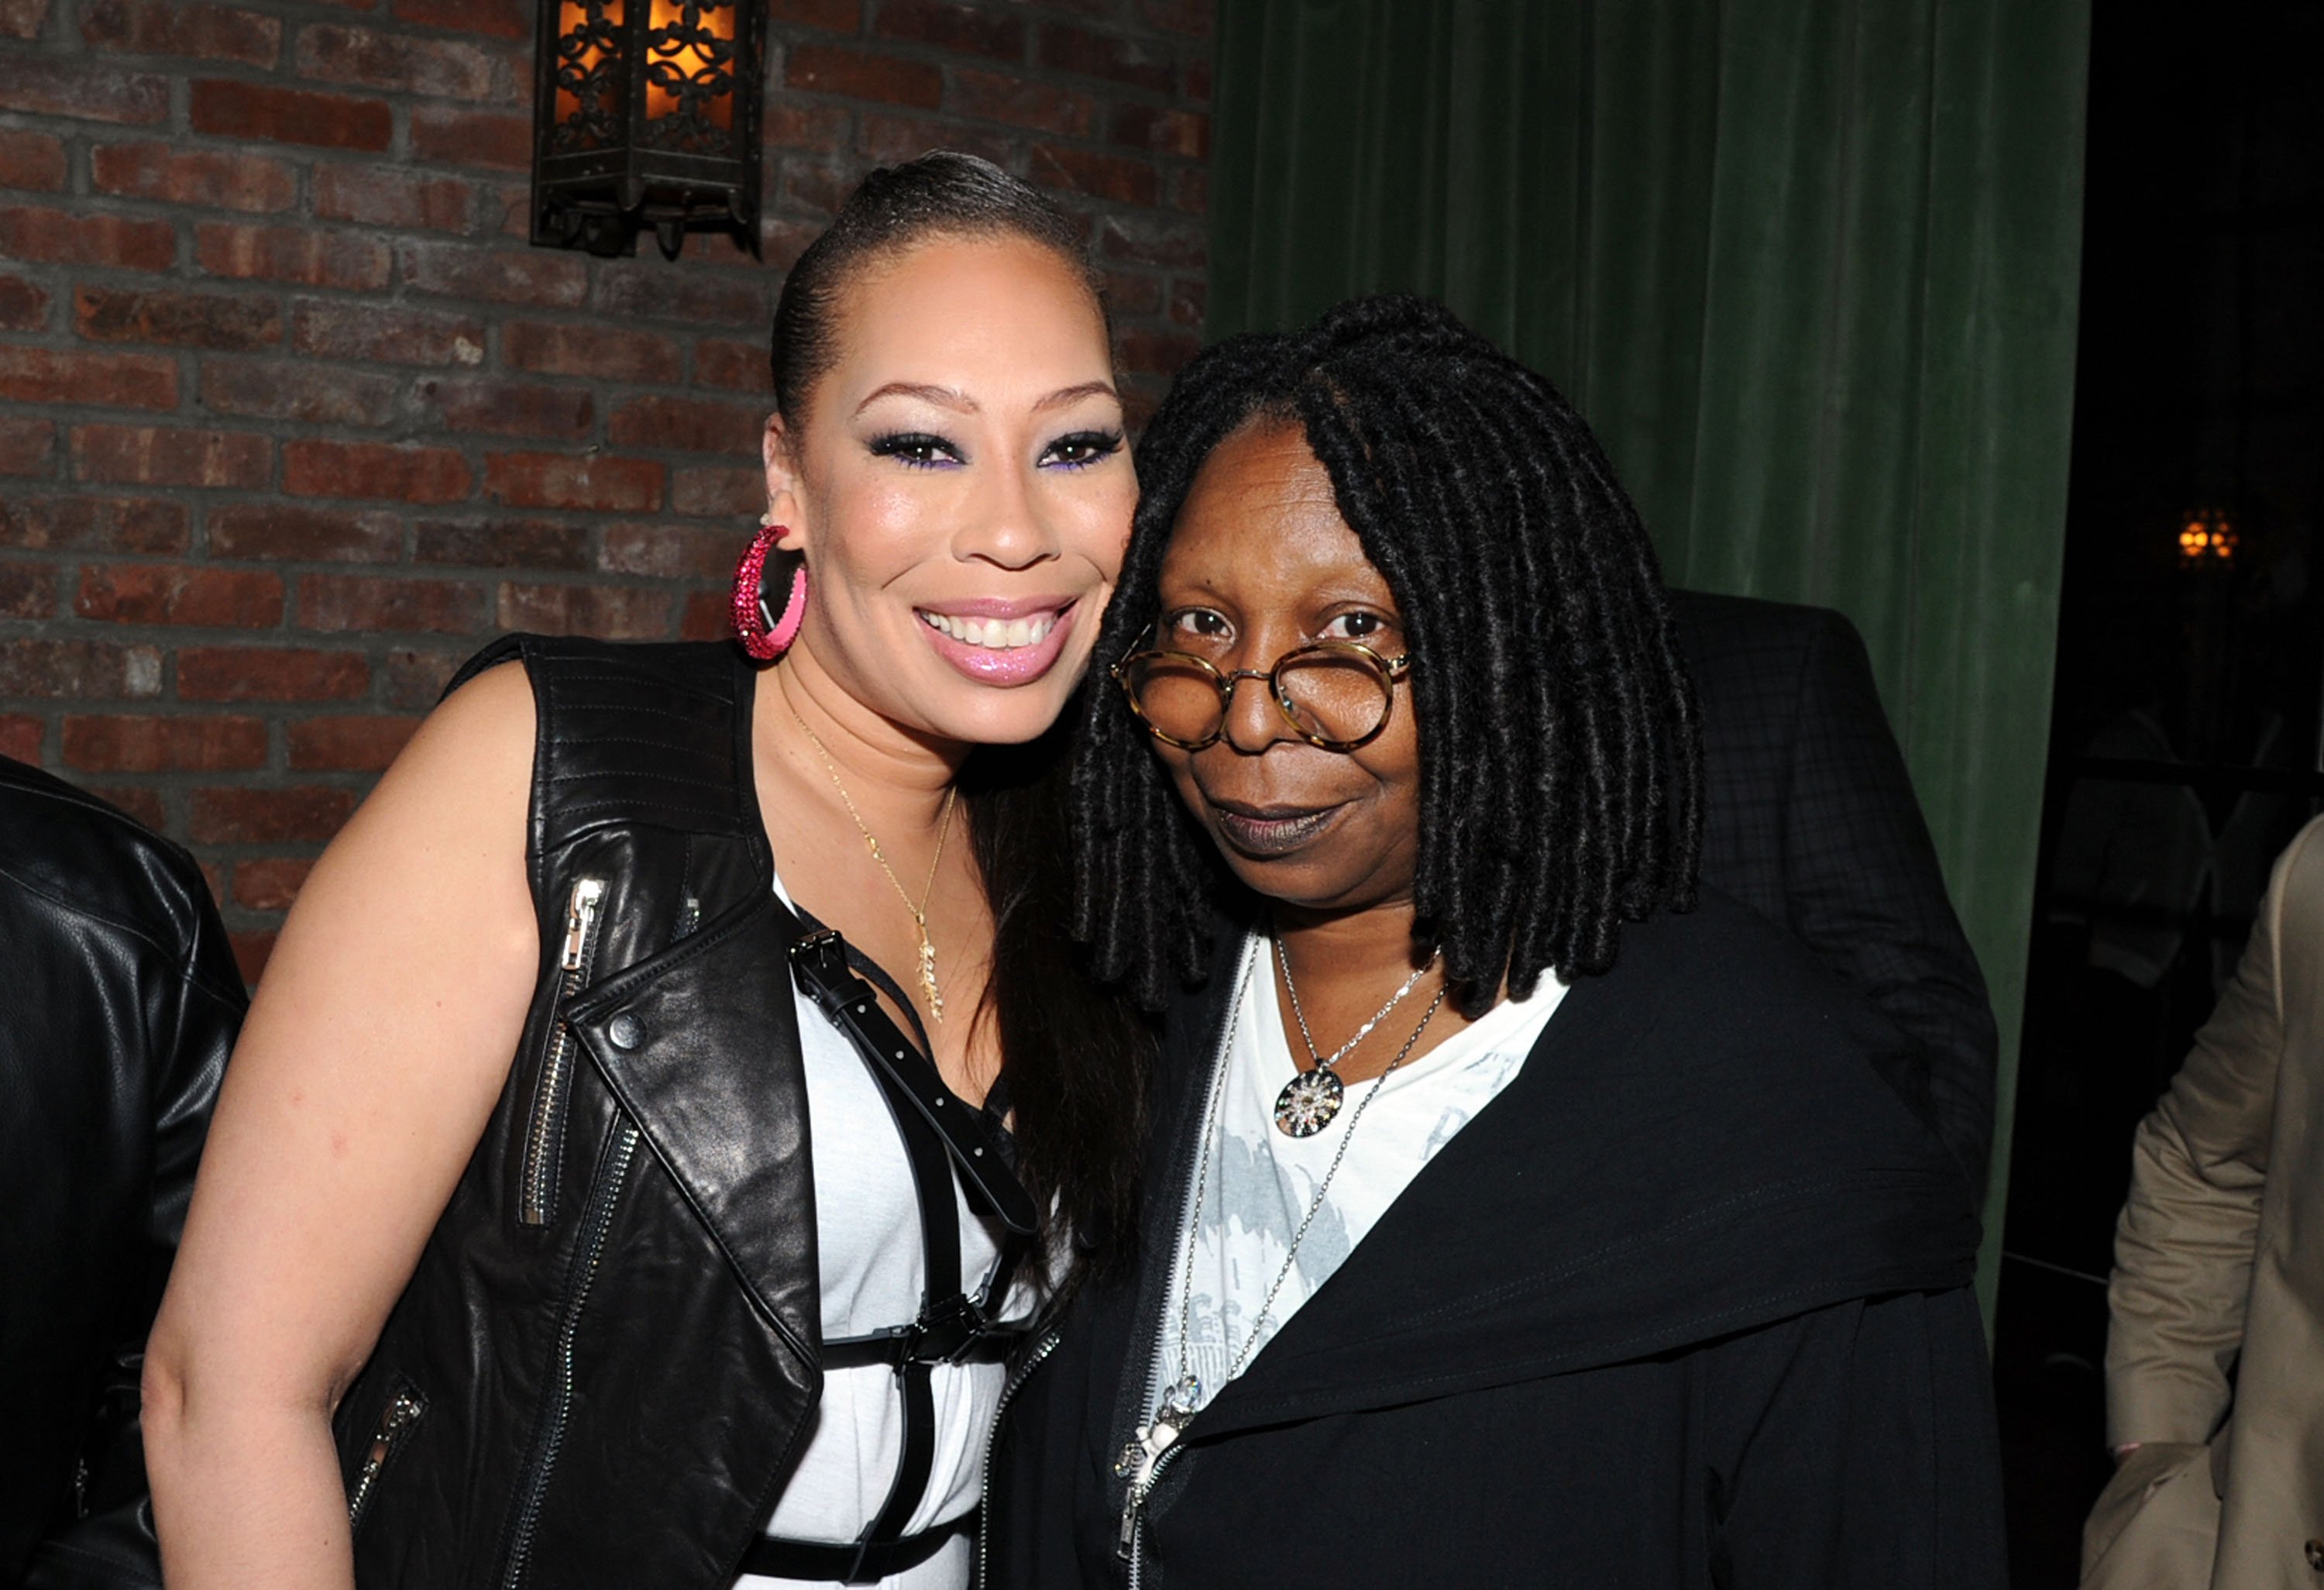 Alex Martin and her mother, Whoopi Goldberg at the forner's 40th birthday celebration in May 2014. | Photo: Getty Images